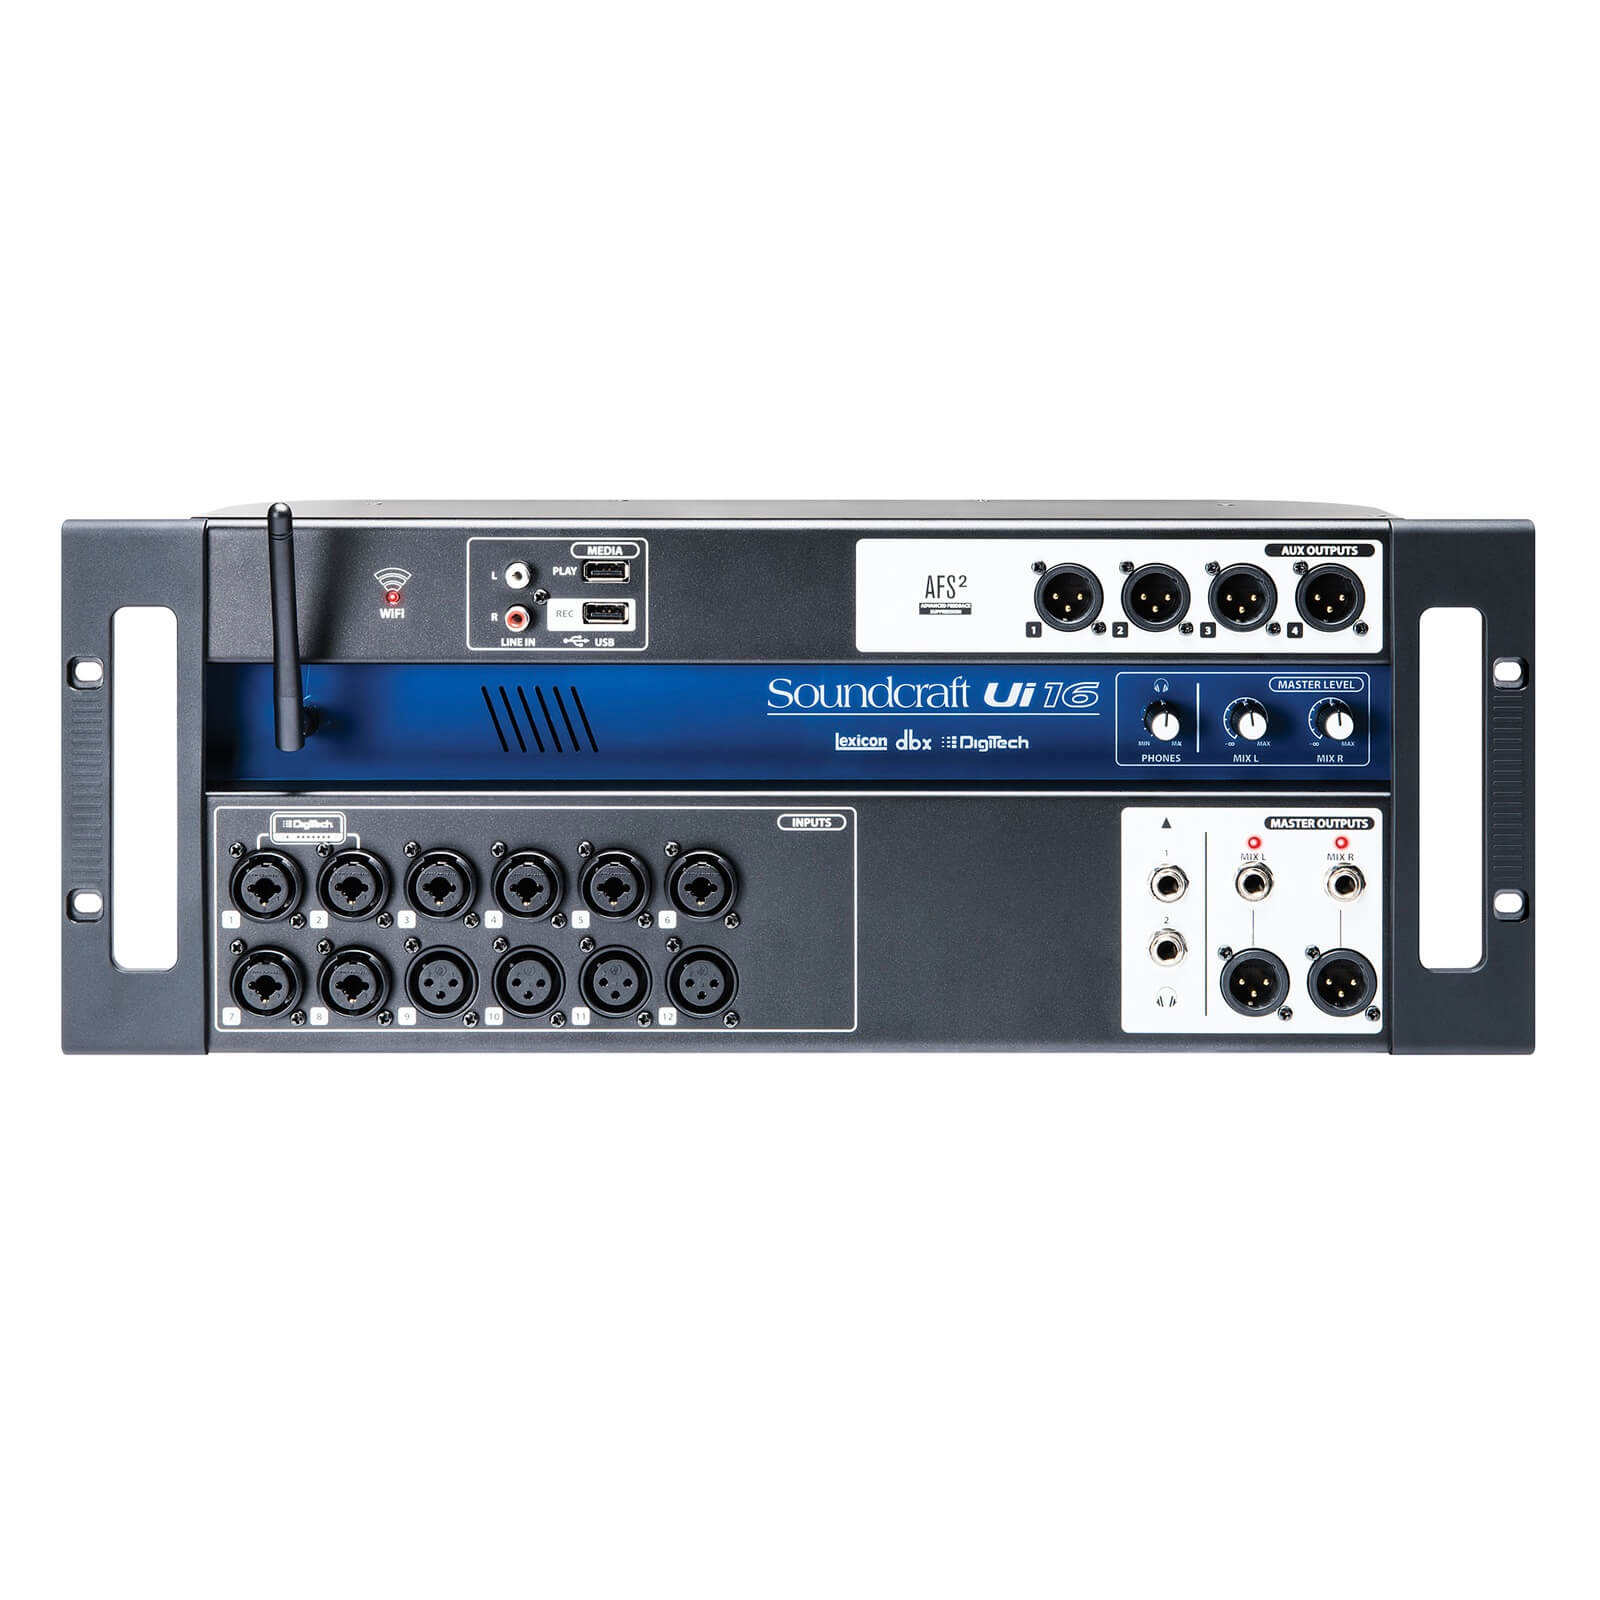 Soundcraft Ui-16 - 16-channel Digital Mixer with Wireless Control, front